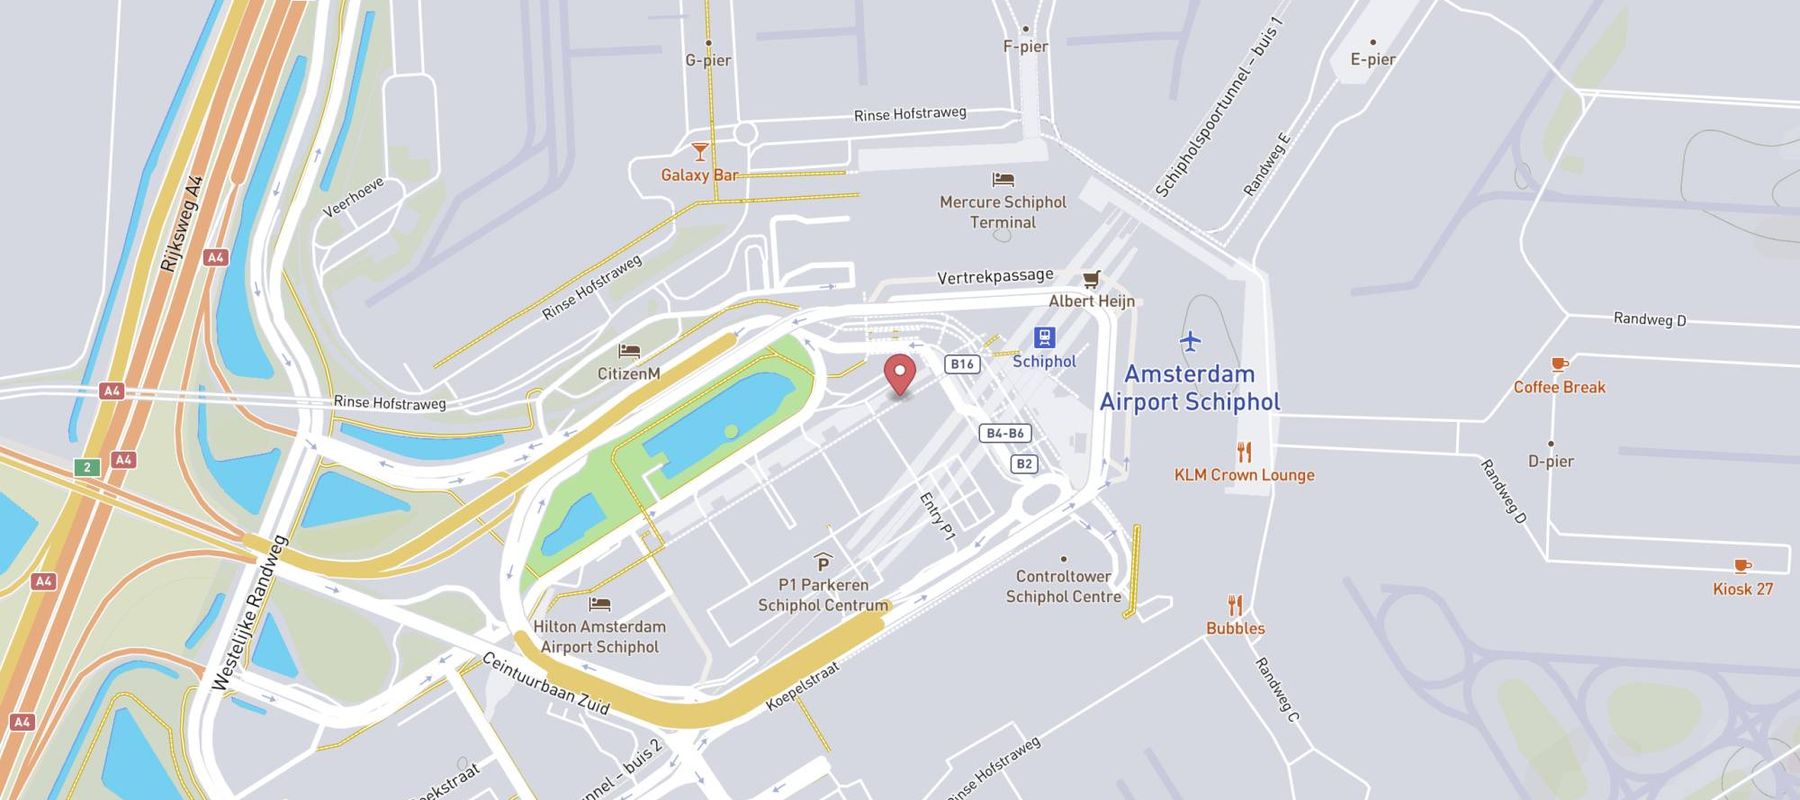 Sheraton Amsterdam Airport Hotel and Conference Center map